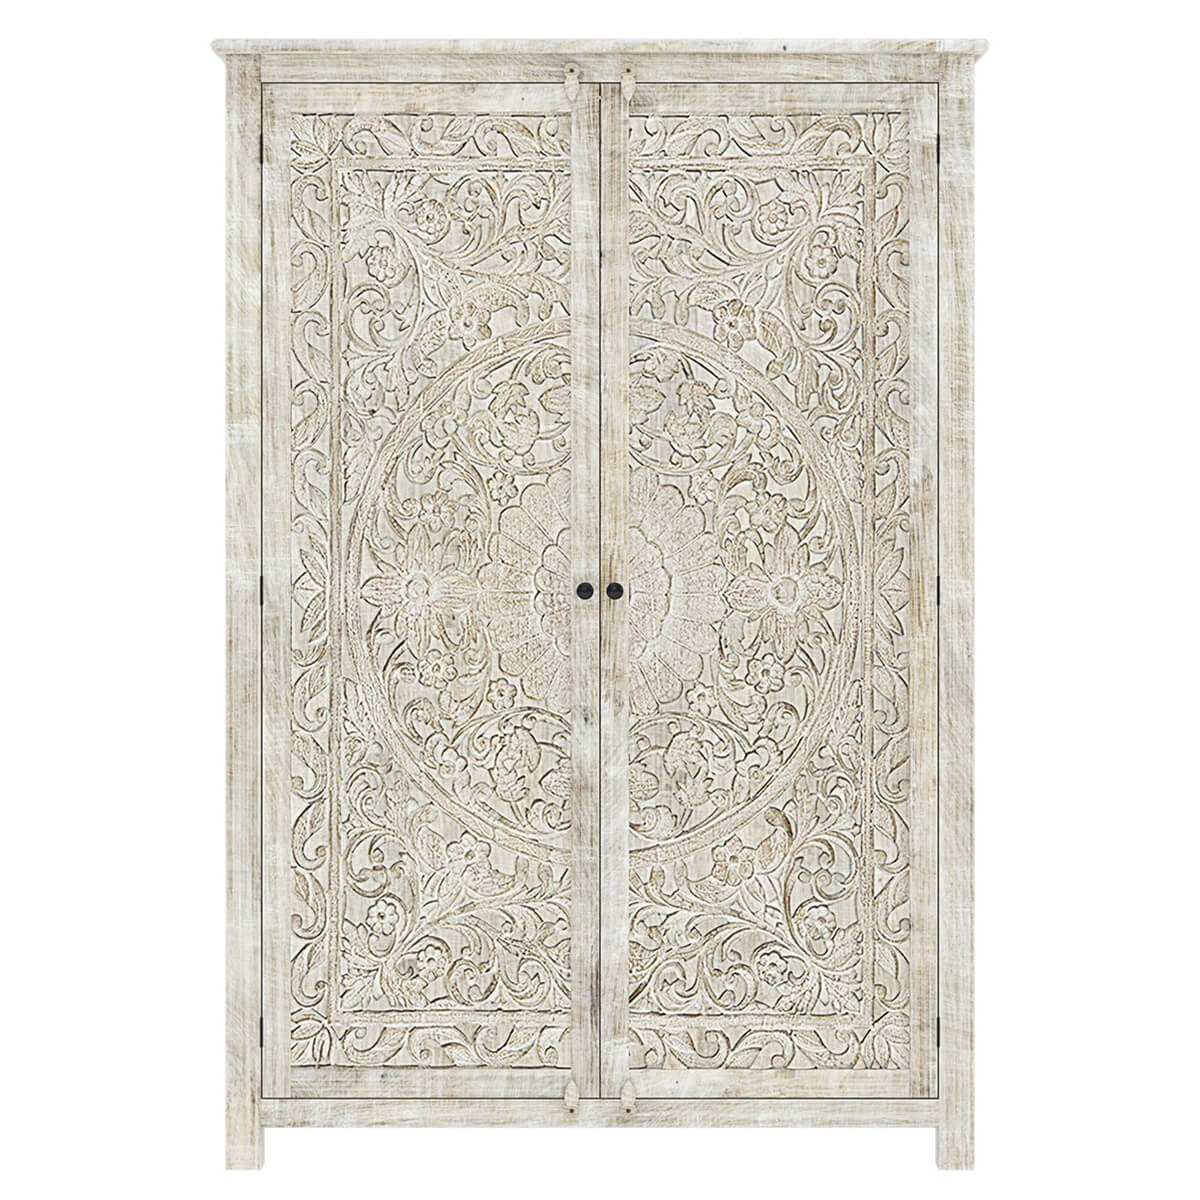 Napa Valley Handcarved Weathered Solid Wood Large White Wardrobe Armoire